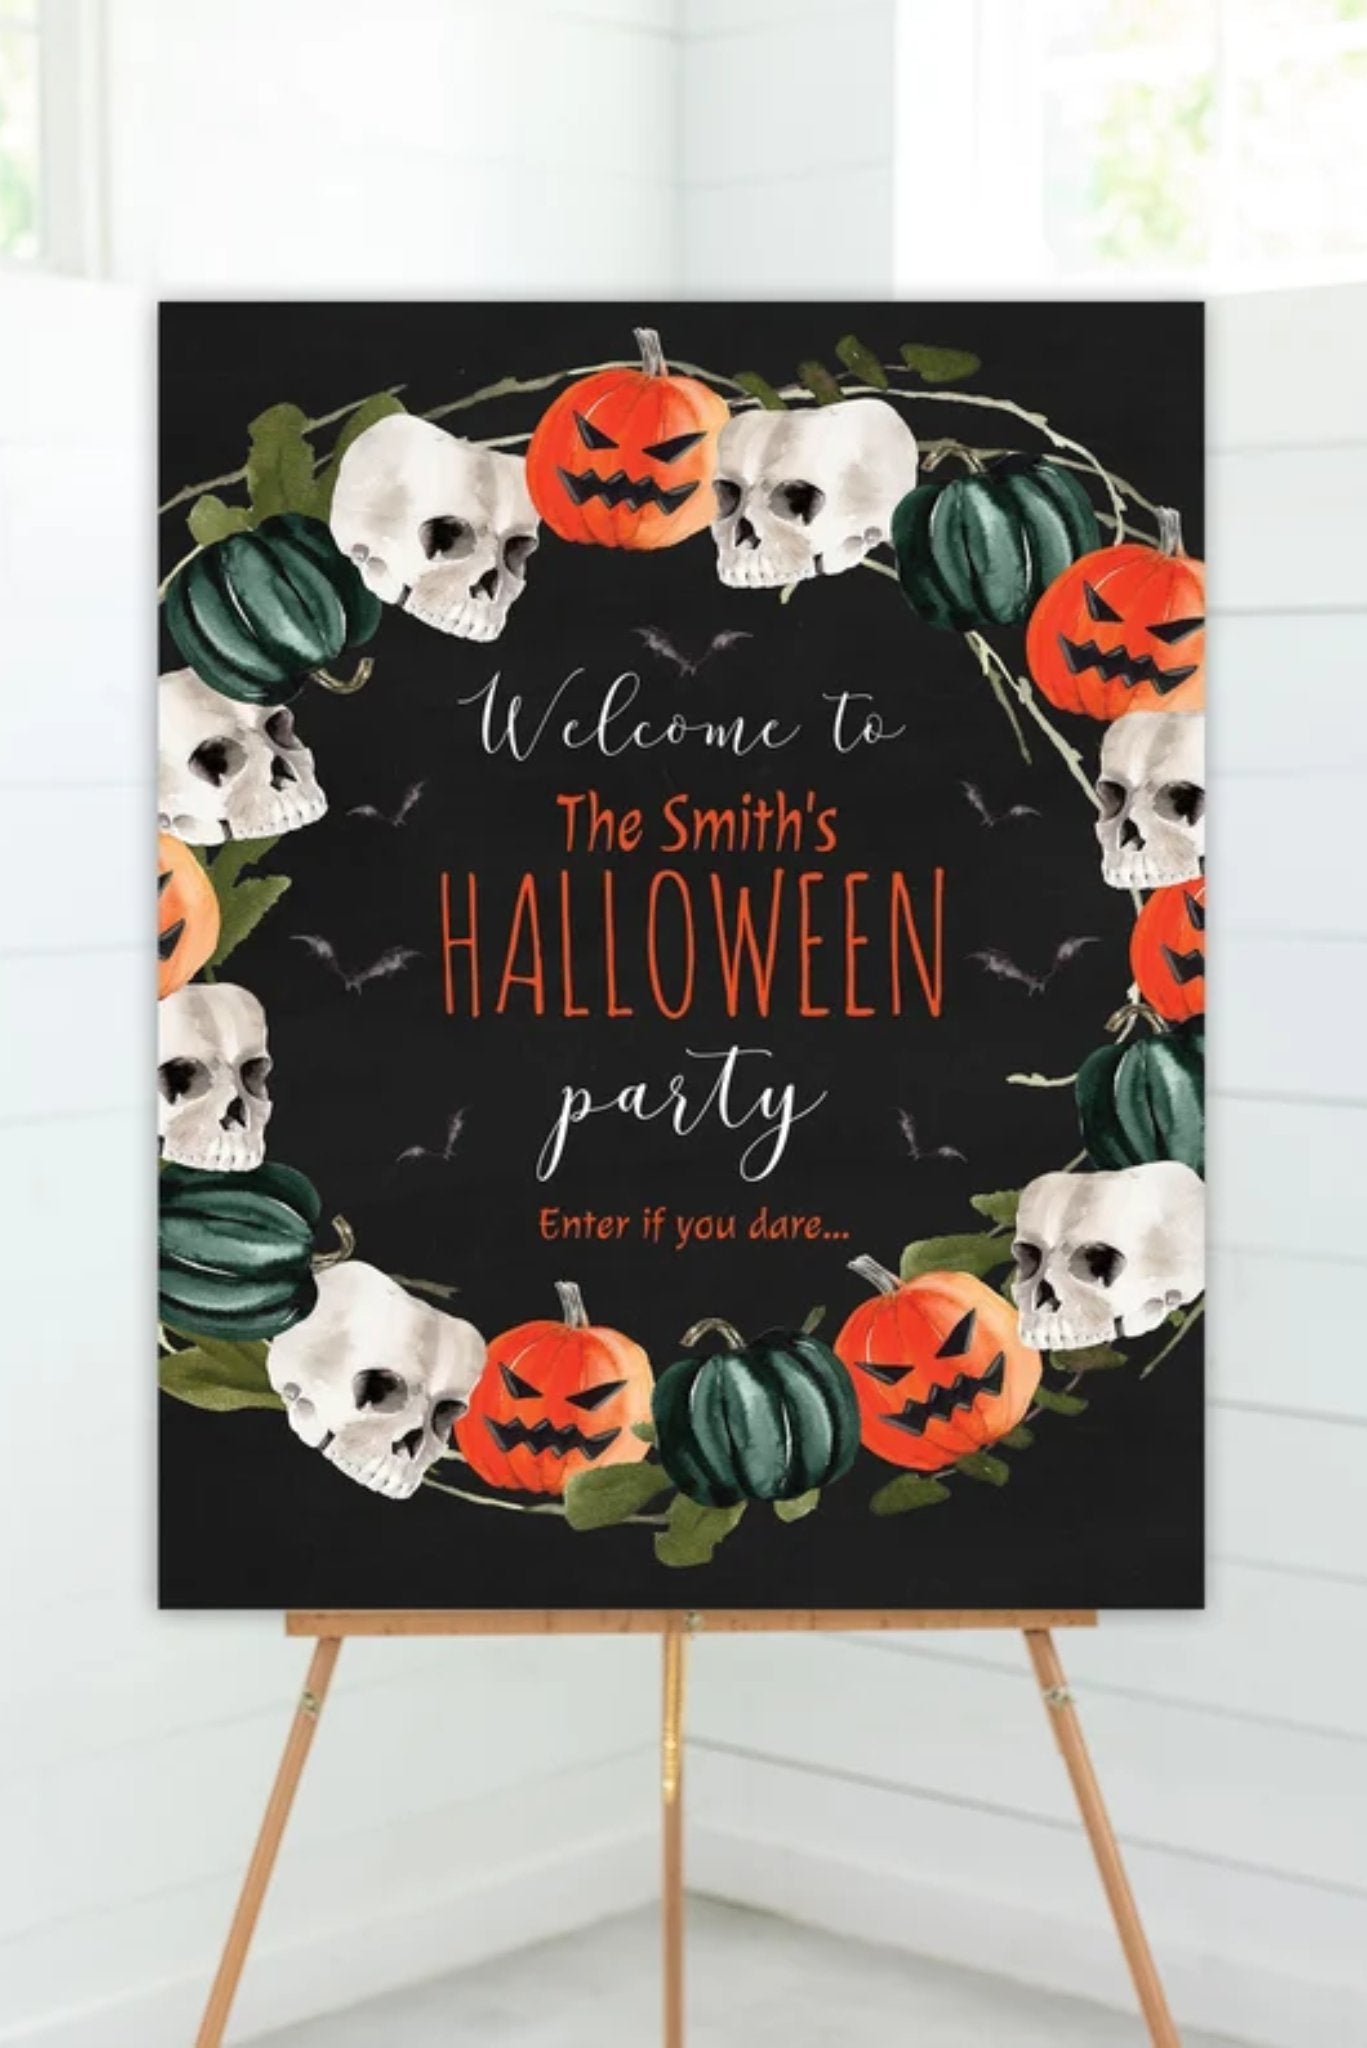 Top 5 Spooky Halloween Party Decorations 2022 - Pretty Collected